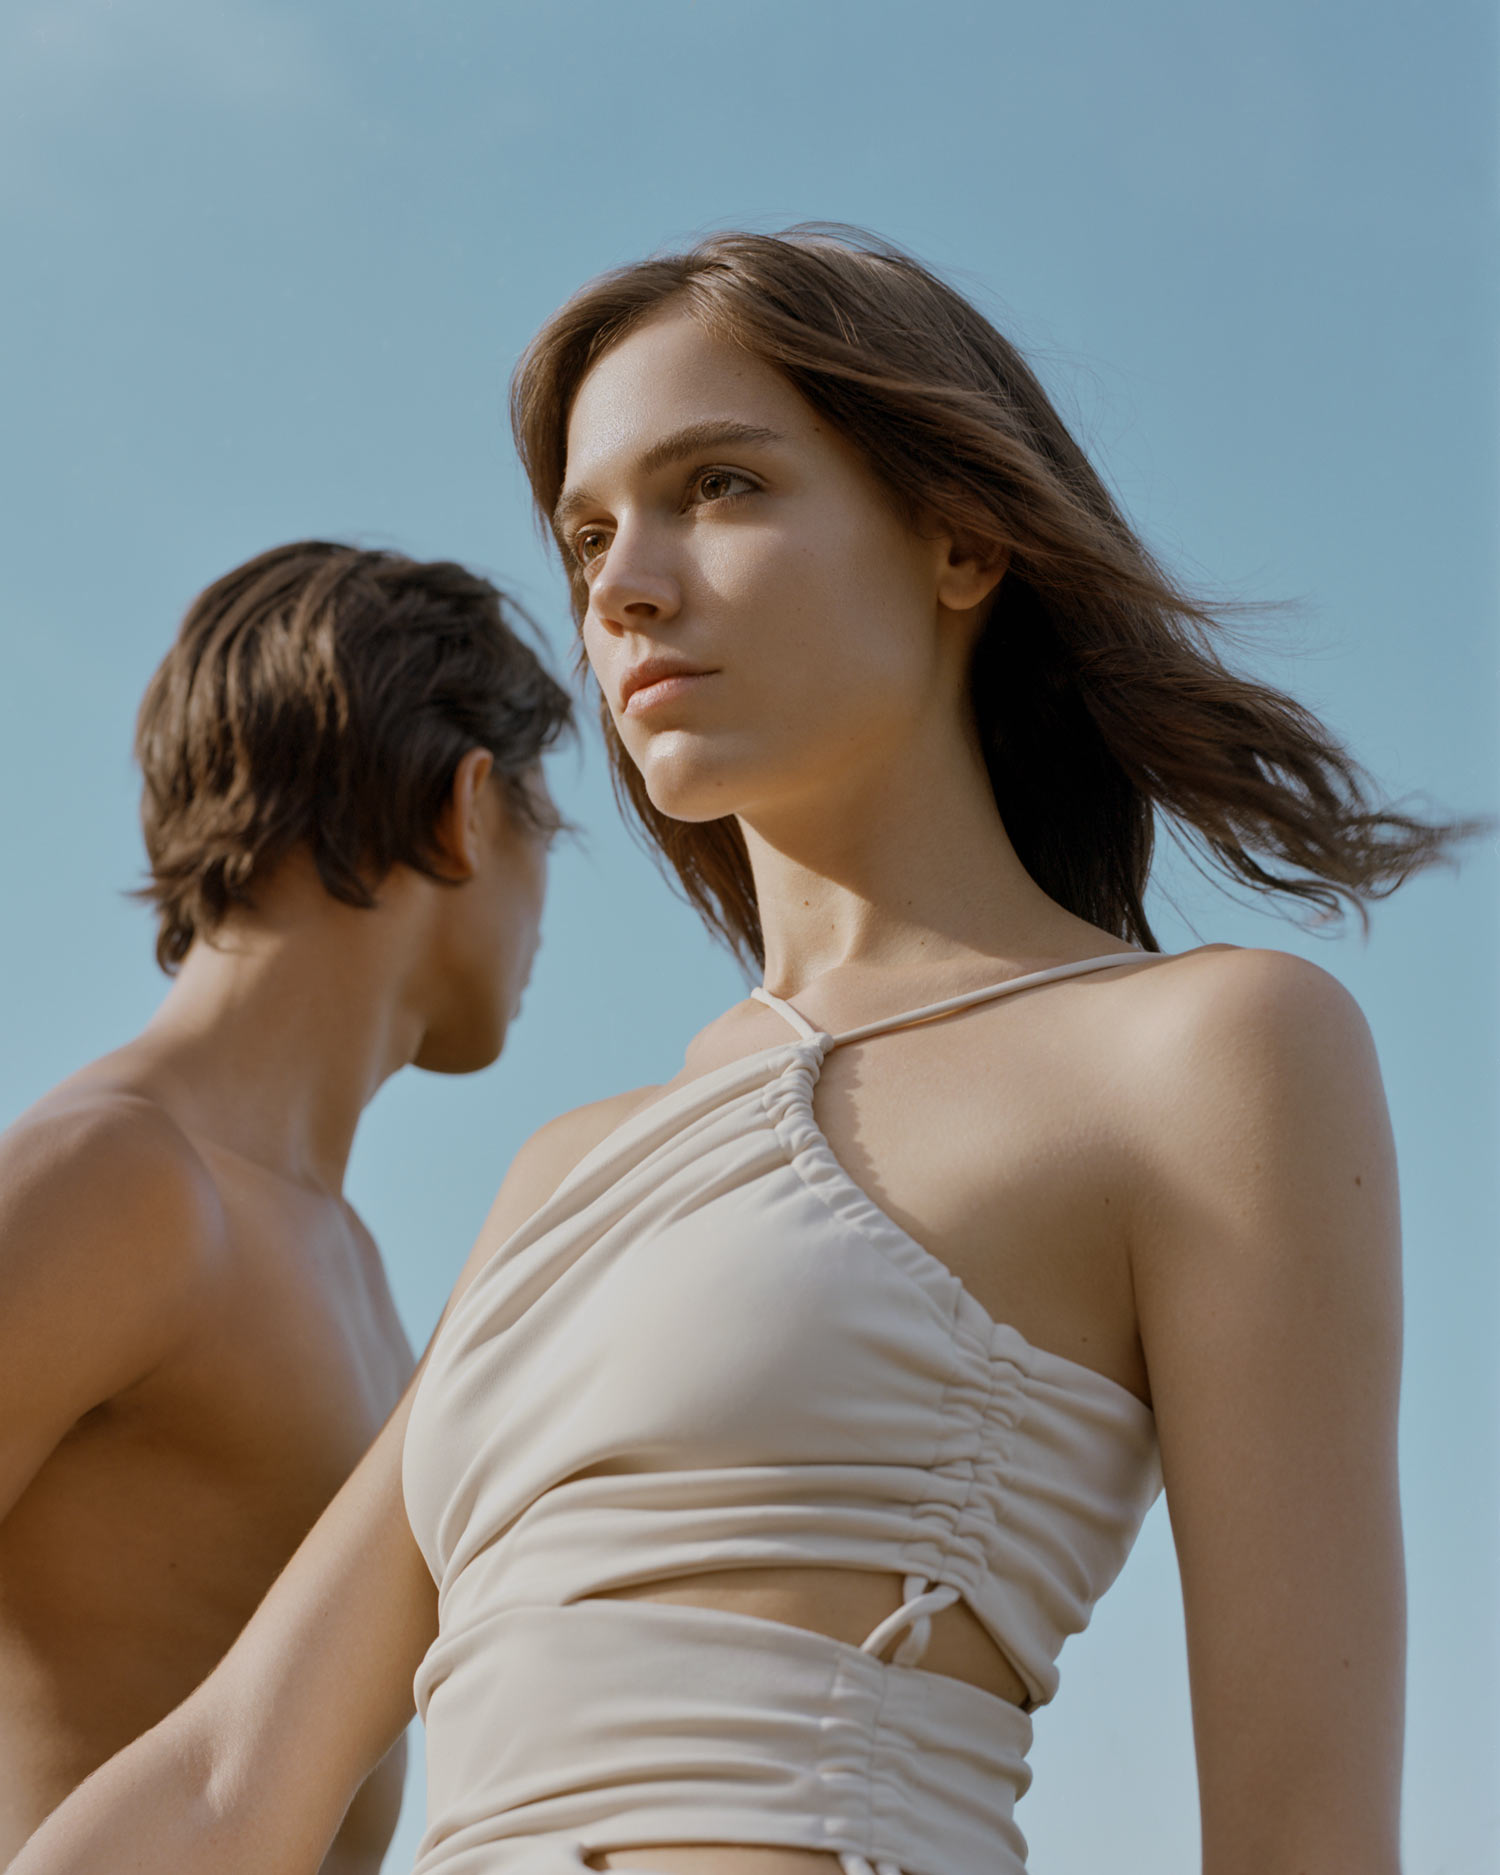 Female model Abby Blaine and male model Tyler Twitty, set against a blue sky, her hair is flowing in the wind. The sun is shining bright. she is wearing a beige Forever 21 dress, Photographed by New York photographer Maria Bruun, photographed using a Mamiya RZ67 camera and Kodak Portra 160 film.